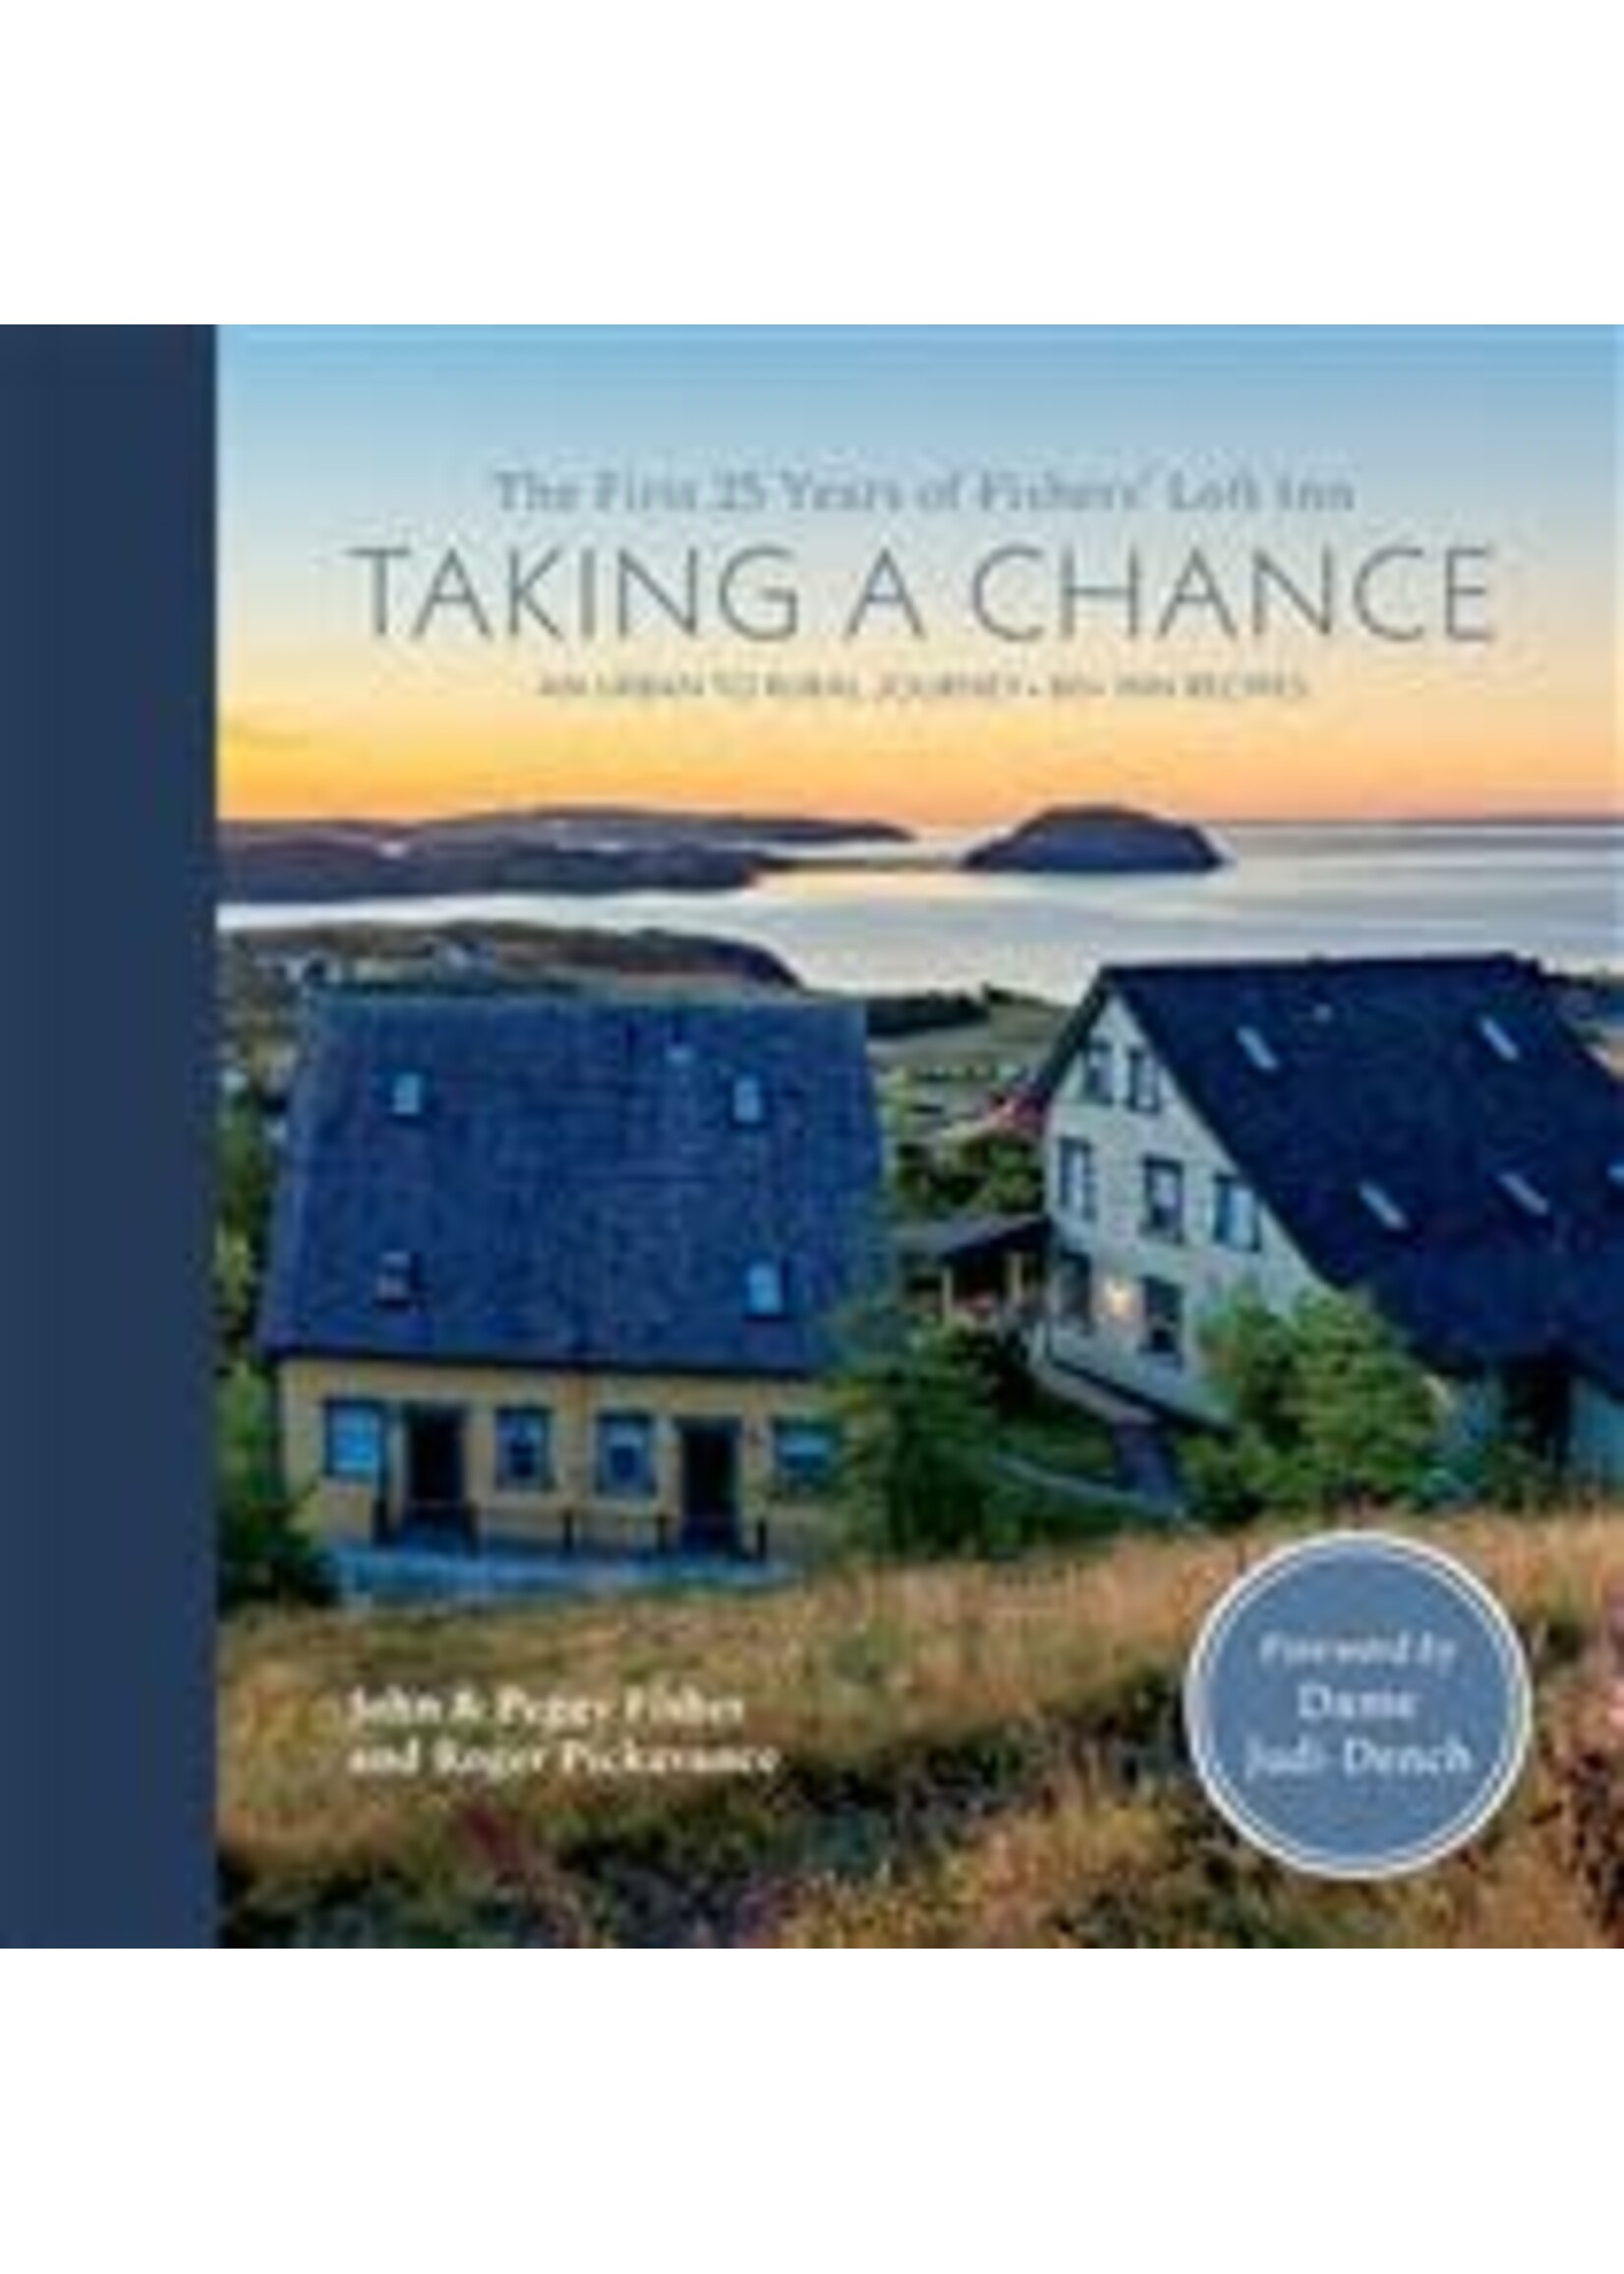 Taking a Chance: The First 25 Years of Fishers' Loft Inn by John Fisher, Peggy Fisher, Roger Pickavance